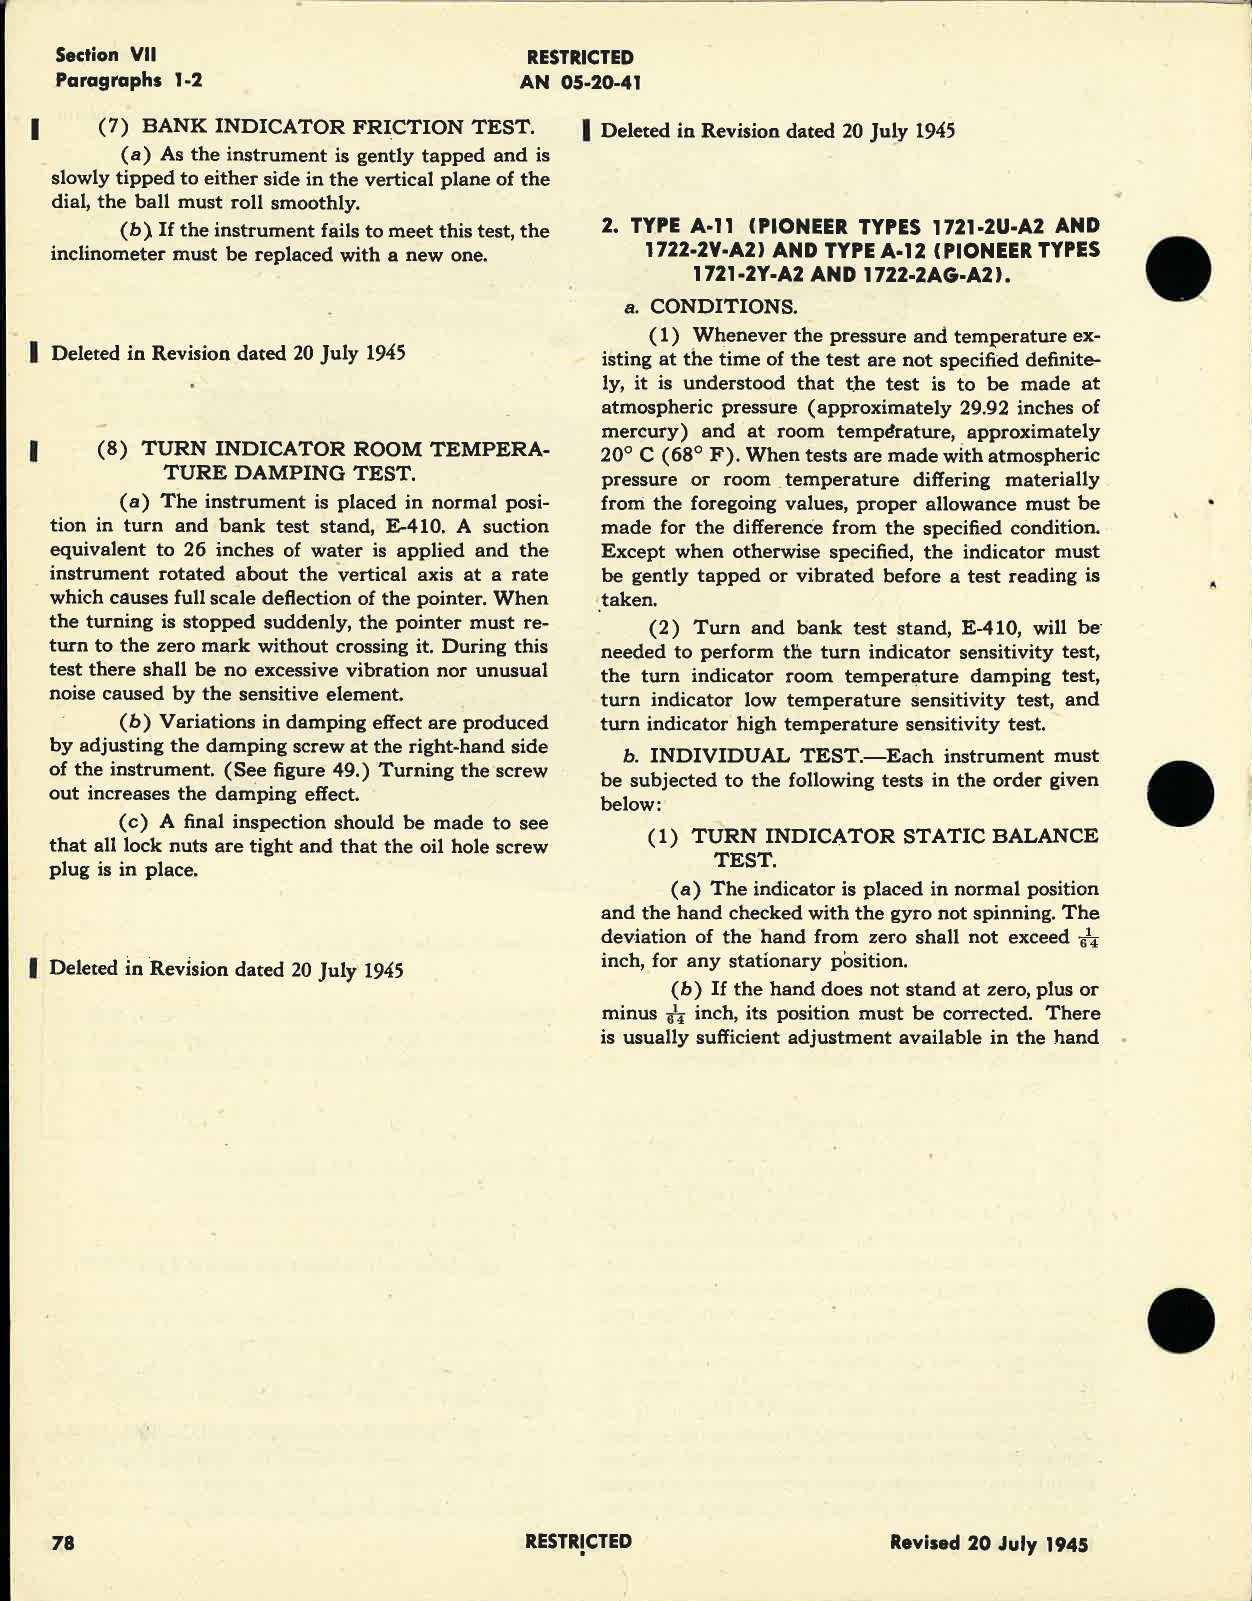 Sample page 6 from AirCorps Library document: Operation, Service, & Overhaul Instructions with Parts Catalog for Turn and Bank Indicators